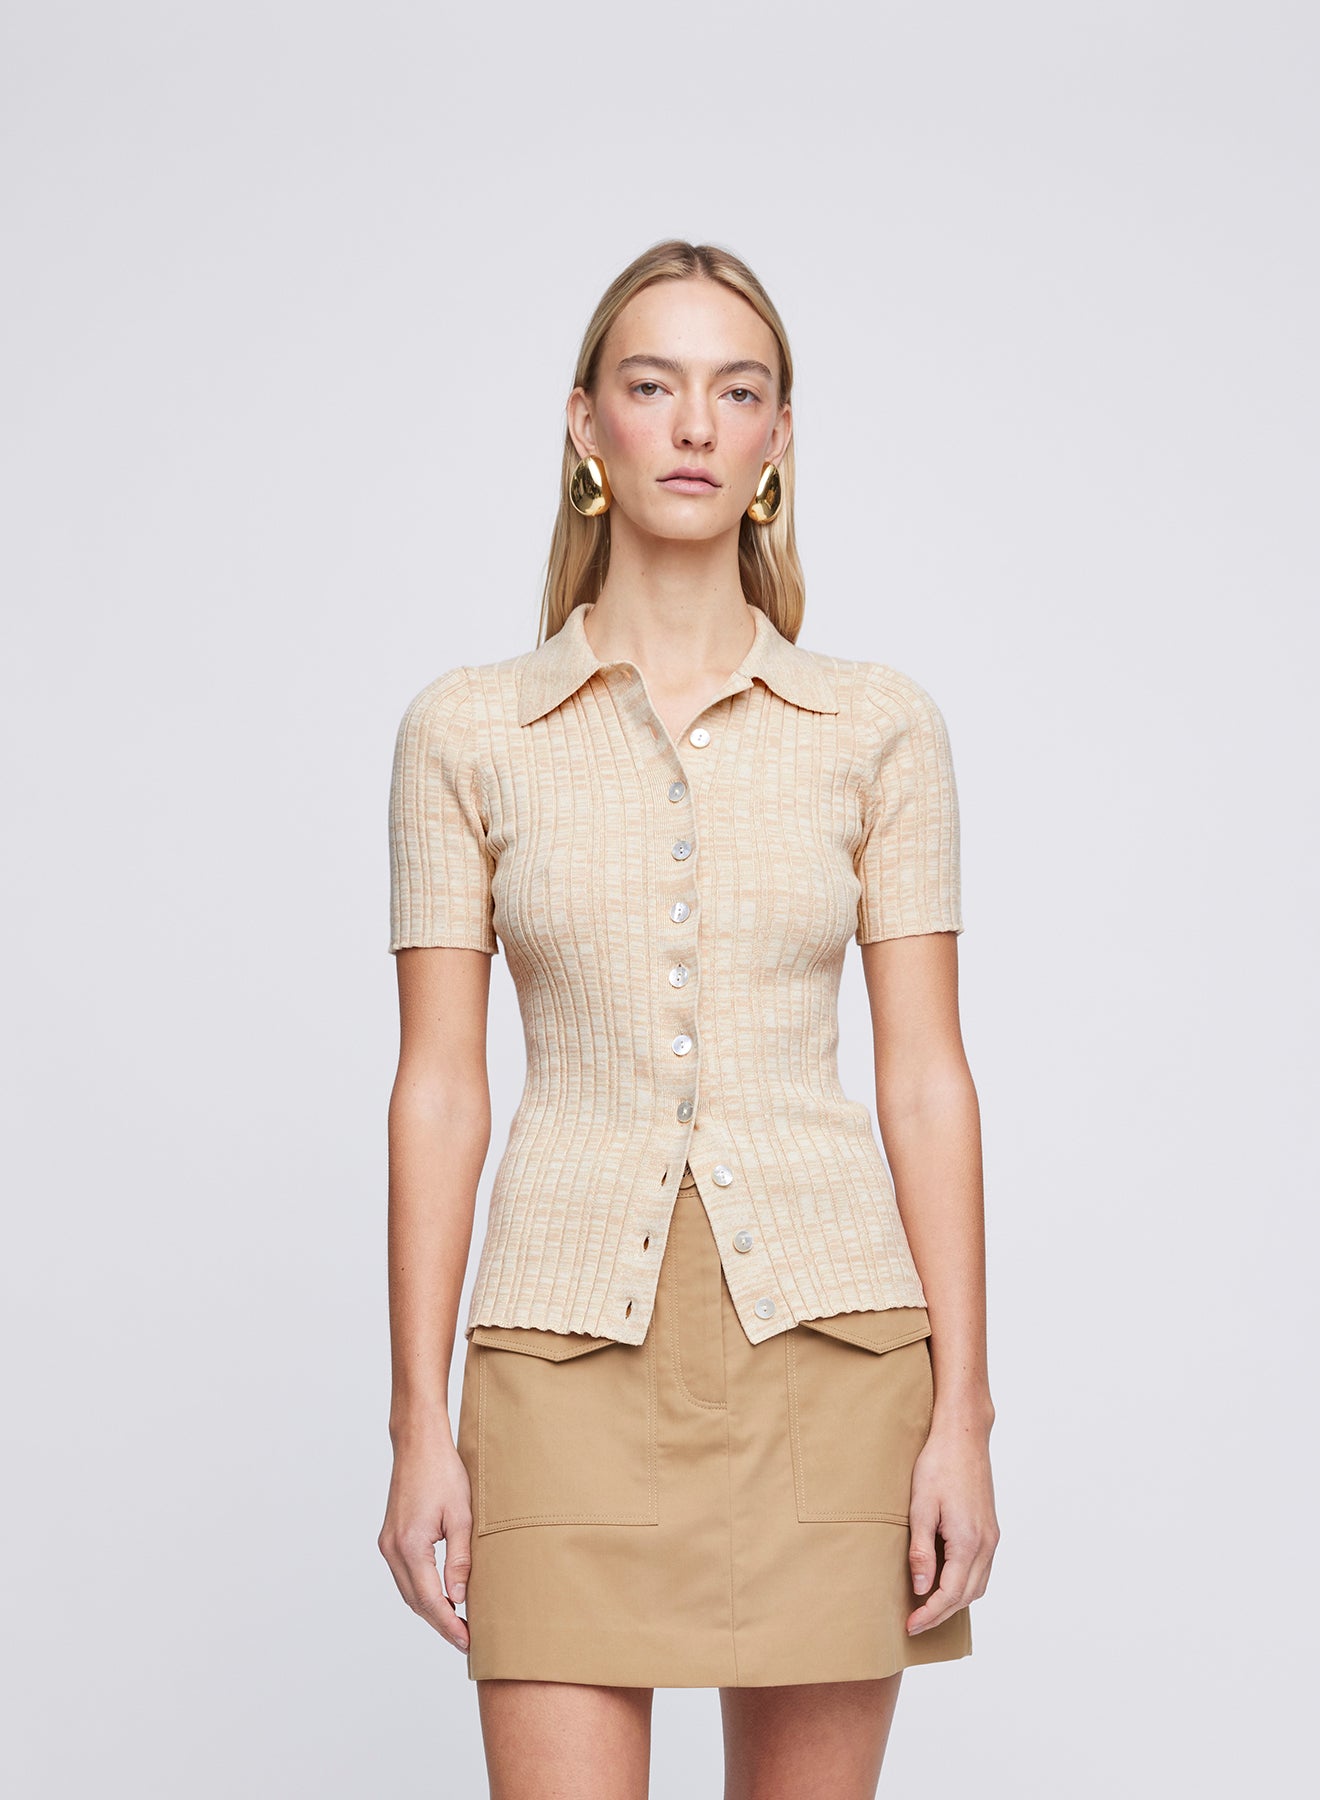 The Anna Quan Avi Top in Sand Dune is a classic polo knit, with a collar and button down placket.